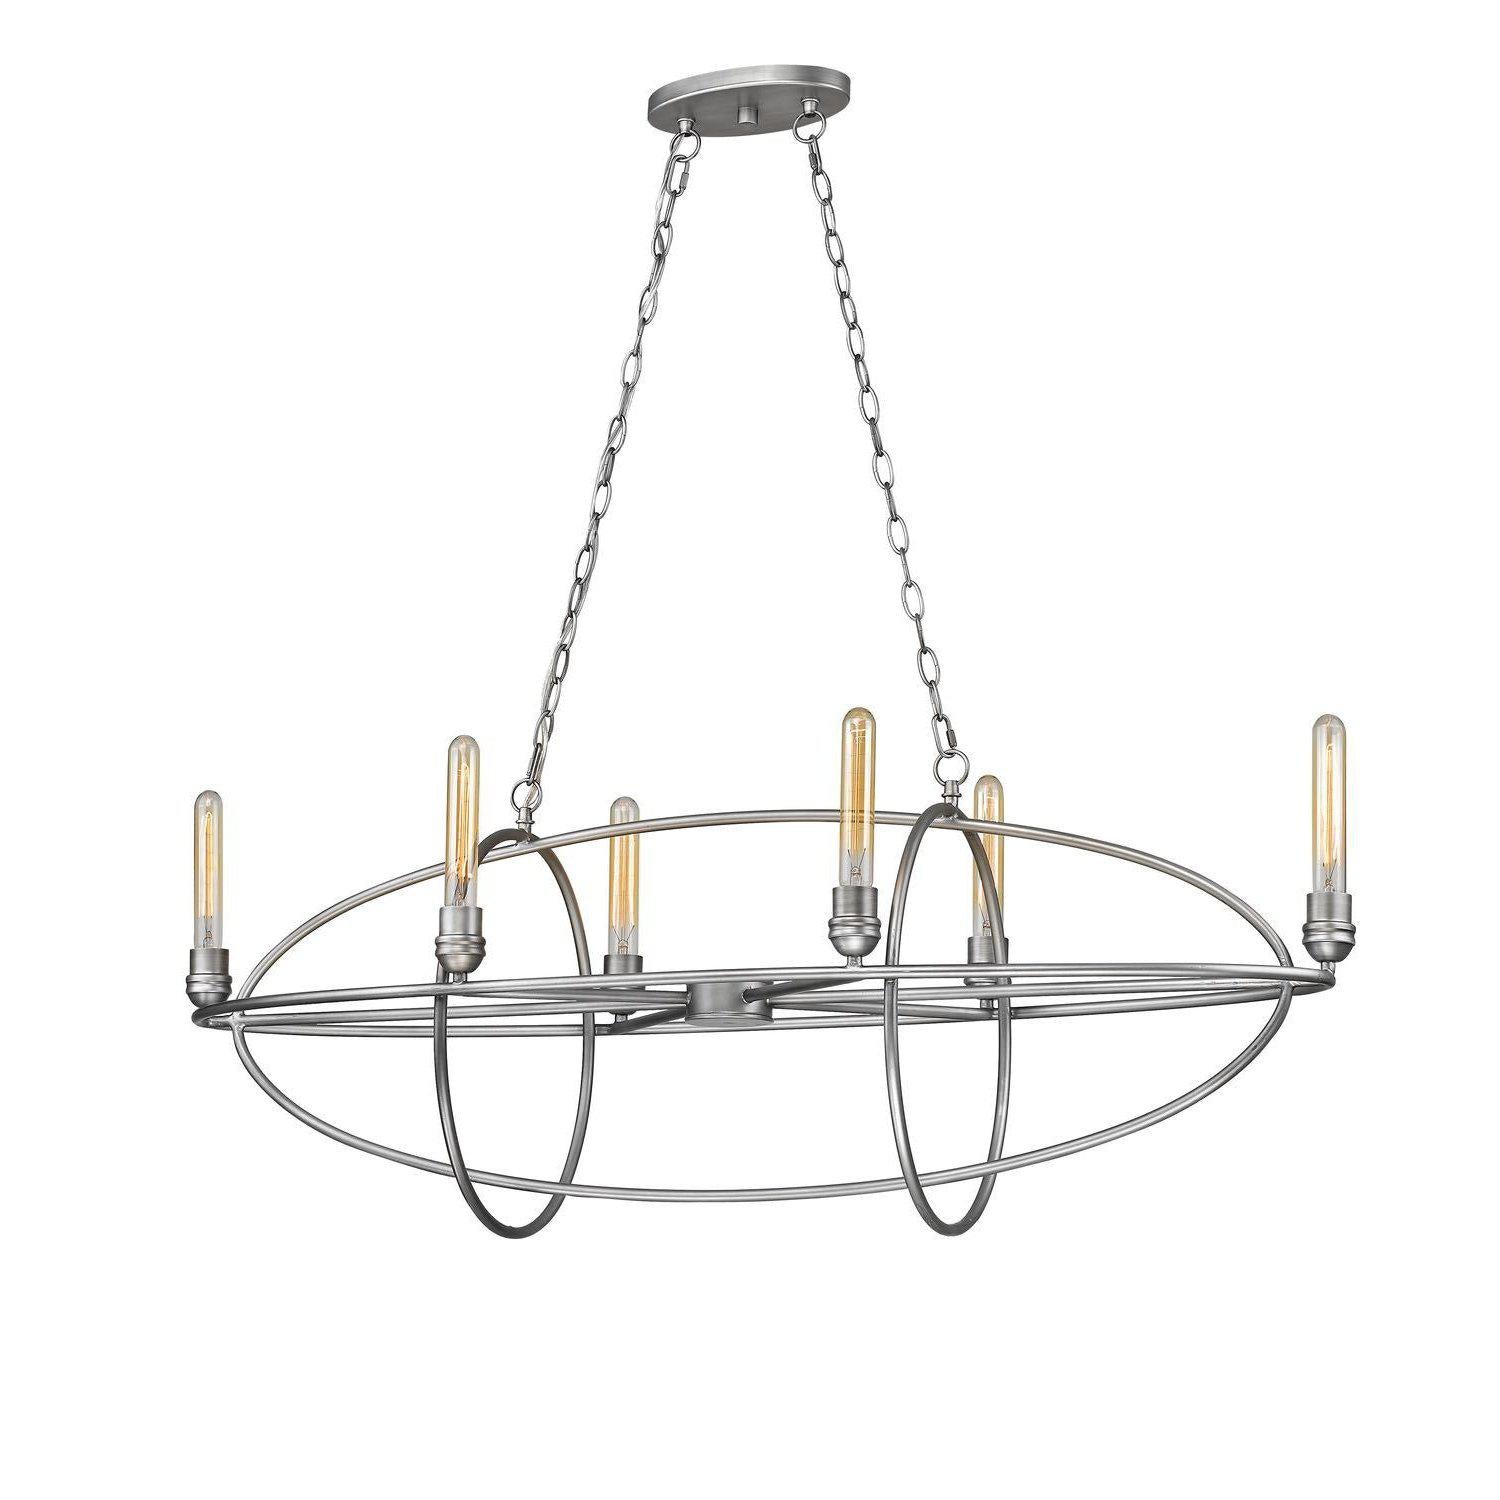 Persis Chandelier Old Silver